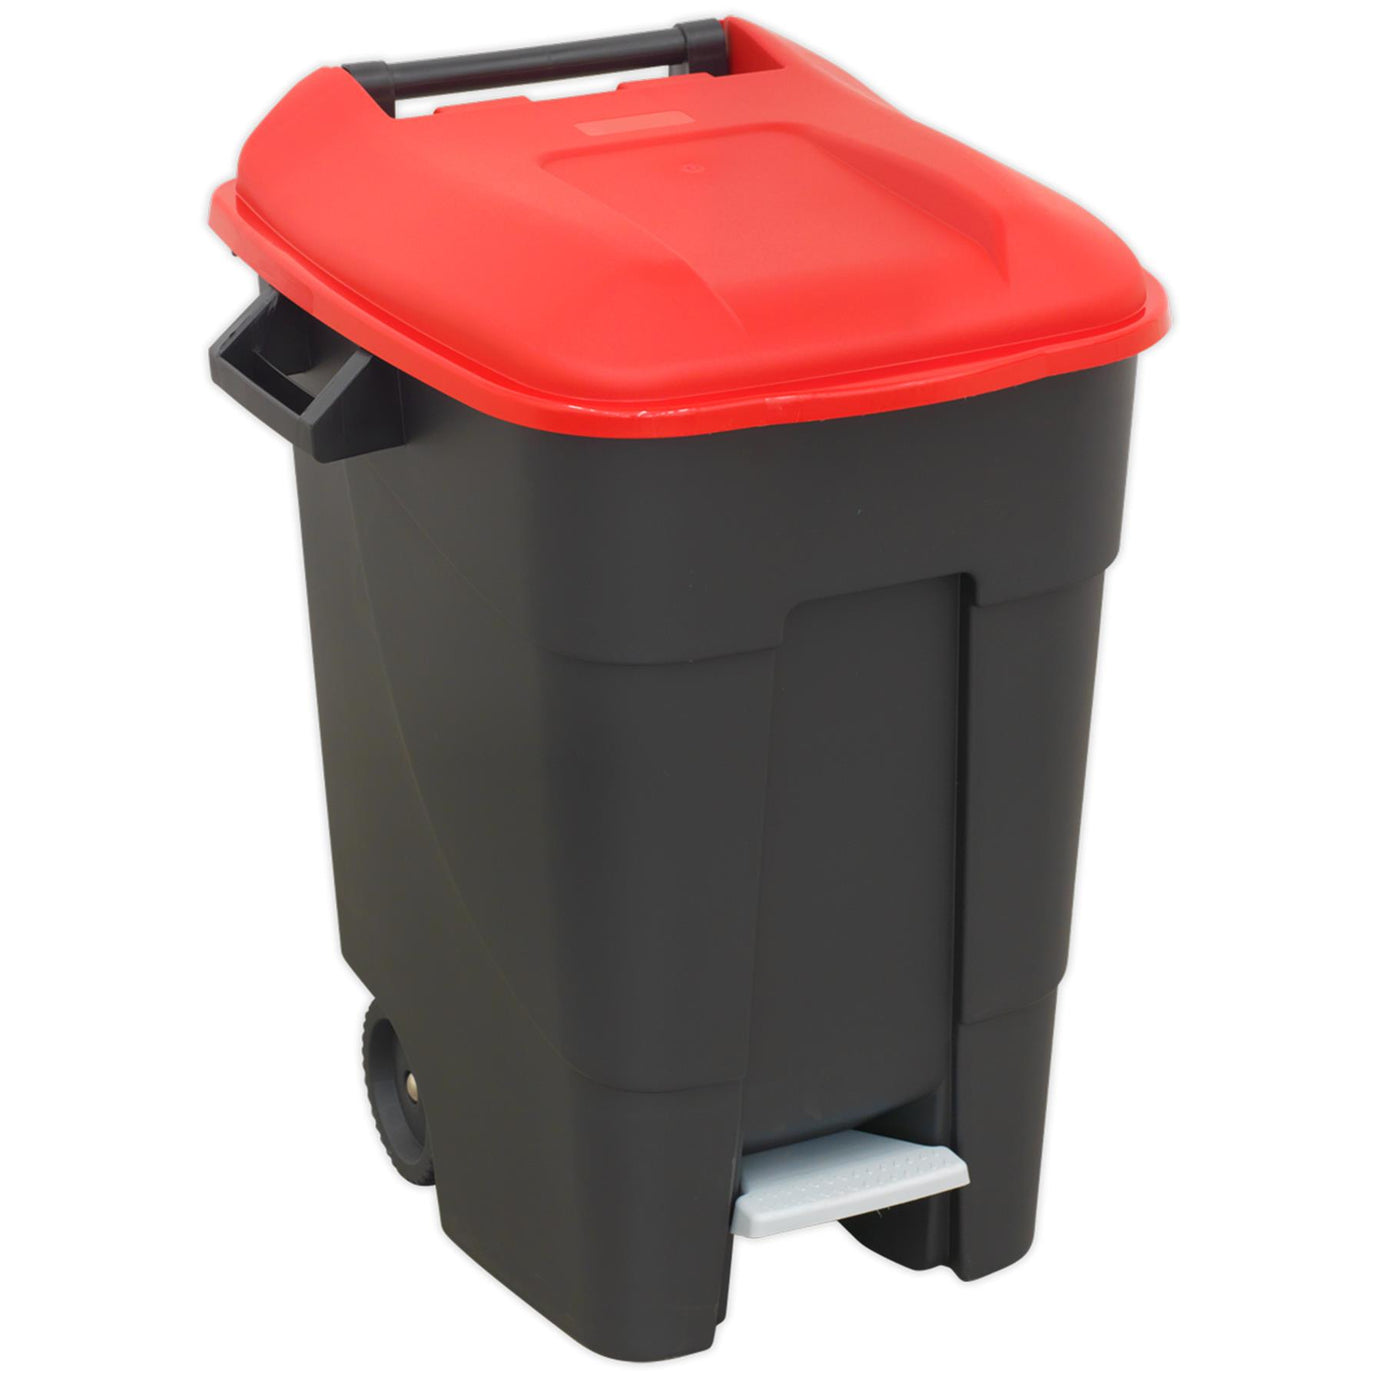 Sealey Refuse/Wheelie Bin with Foot Pedal 100L - Red